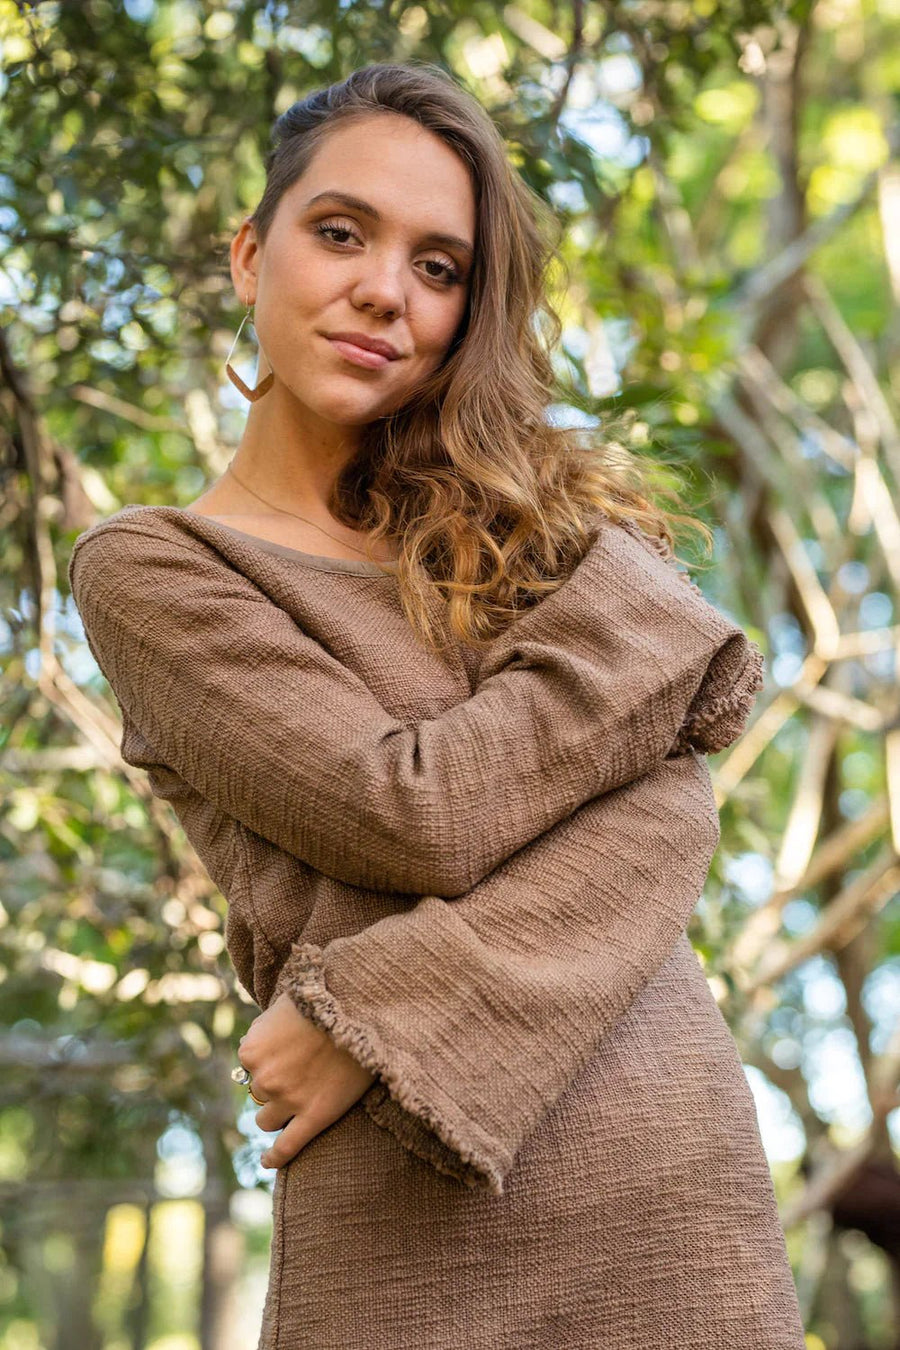 BACK TO NATURE LONG SLEEVE TOP IN BROWN - Trancentral Shop